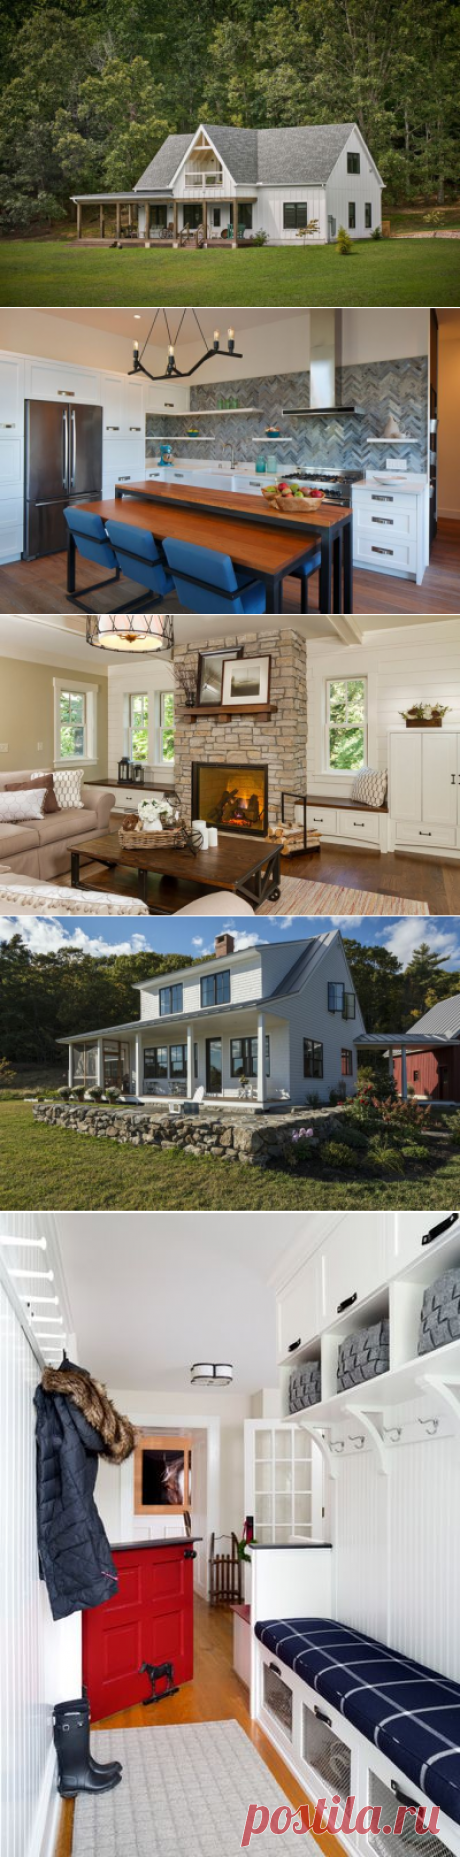 12 Welcoming Homes Bring Farmhouse Touches to Modern Life